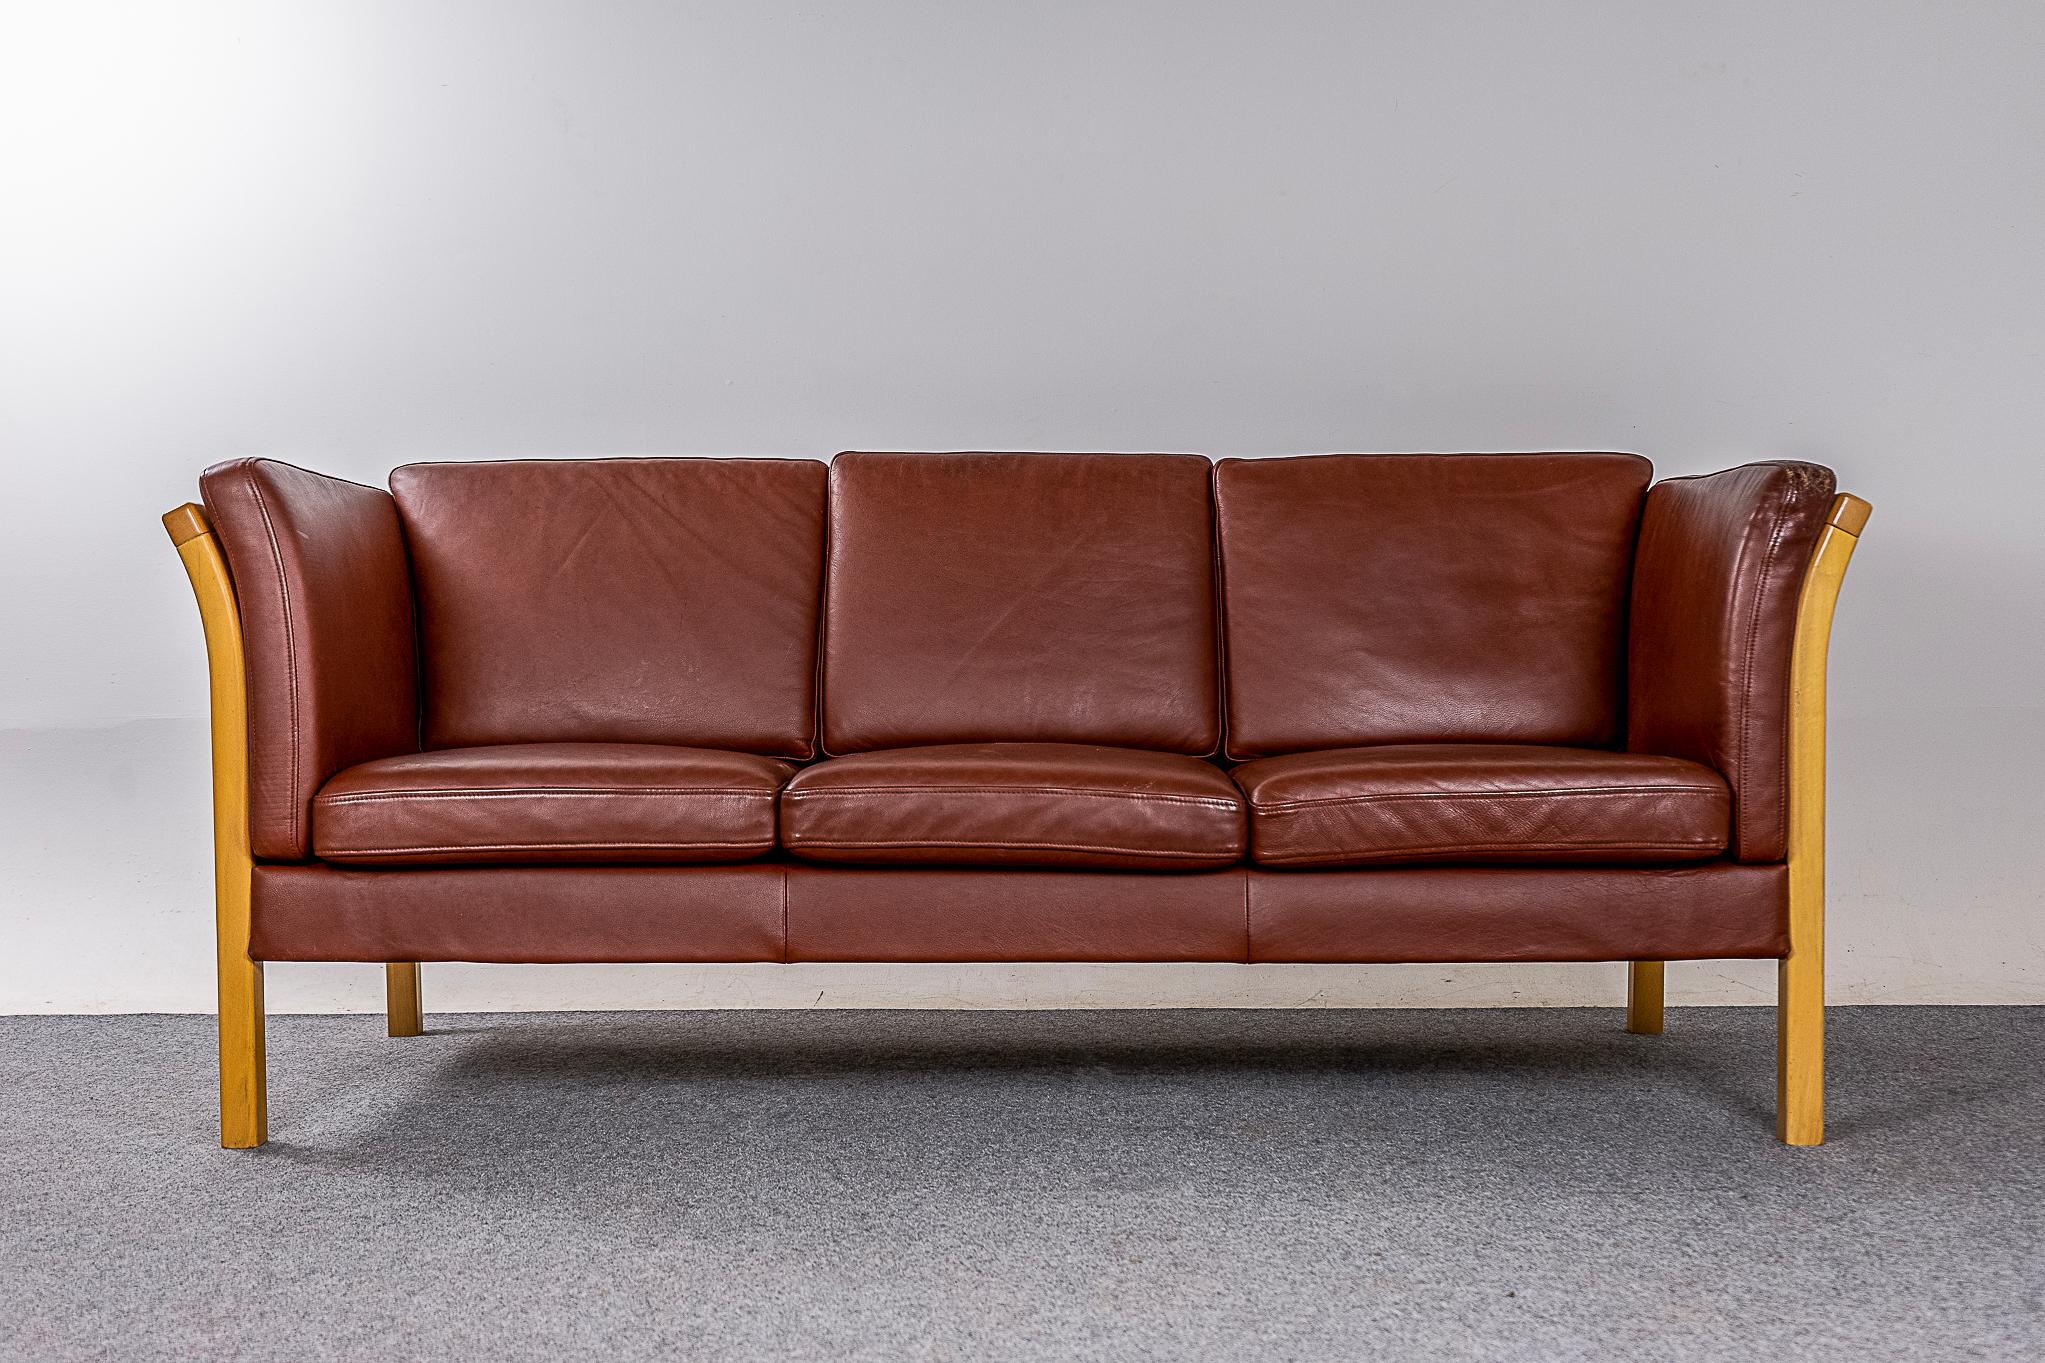 Beech wood & leather Danish sofa, circa 1960's. Original leather is soft and supple while also being durable to ensure years of use and enjoyment. Three seat sofa frame is constructed of solid beech wood with removable cushions on both the seat and